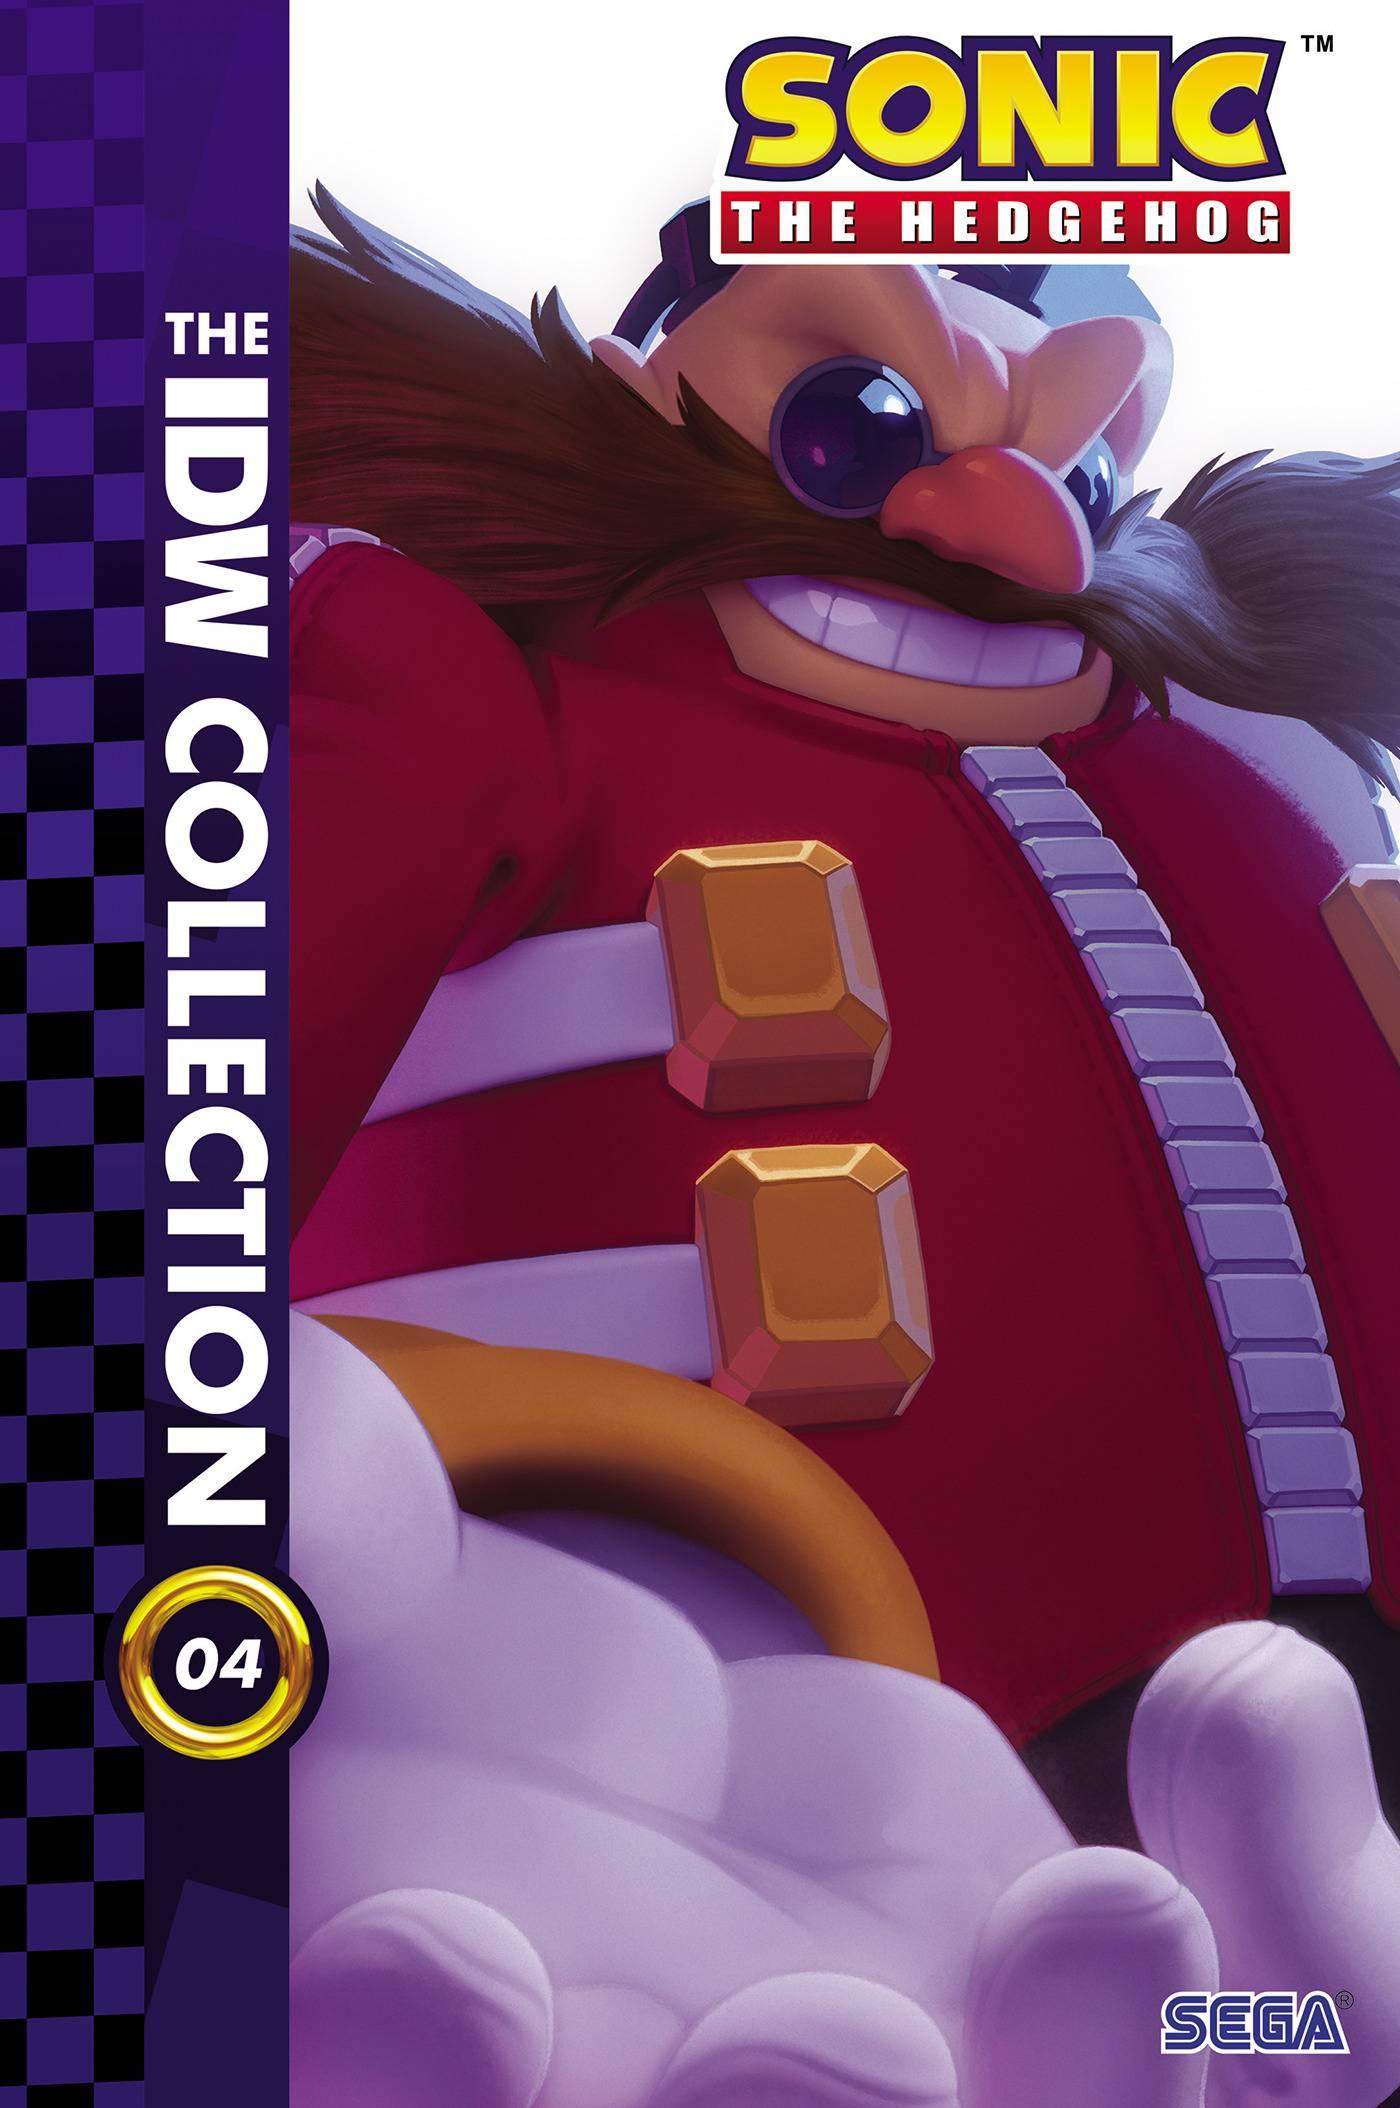 SONIC THE HEDGEHOG IDW COLLECTION HC VOL 04 - Kings Comics